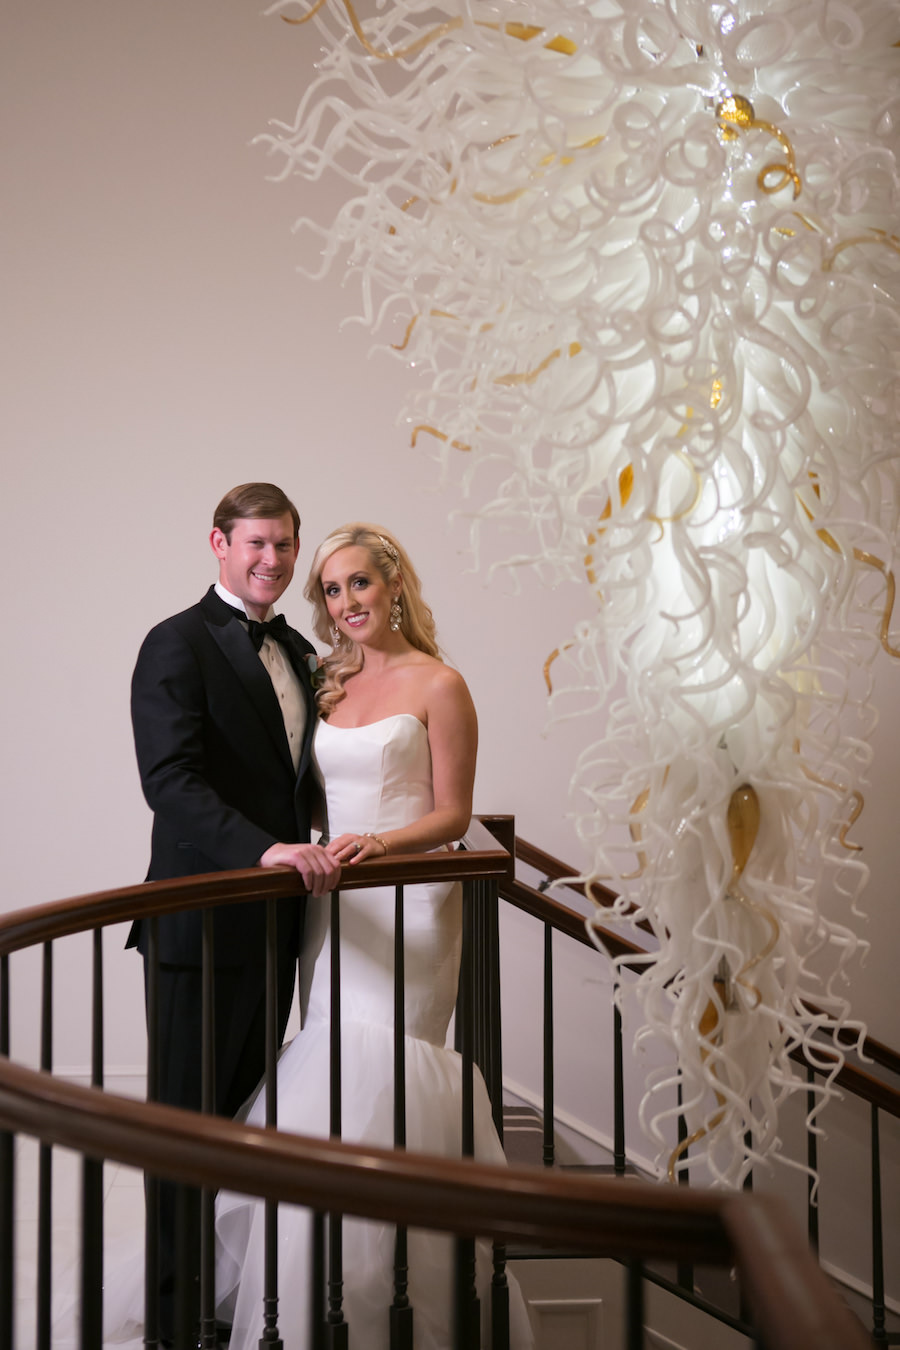 Bride and Groom Wedding Portrait at Top of Staircase with Modern Gold and White Chandelier | Wedding Venue The Tampa Club | Tampa Bay Wedding Photographer Carrie Wildes Photography